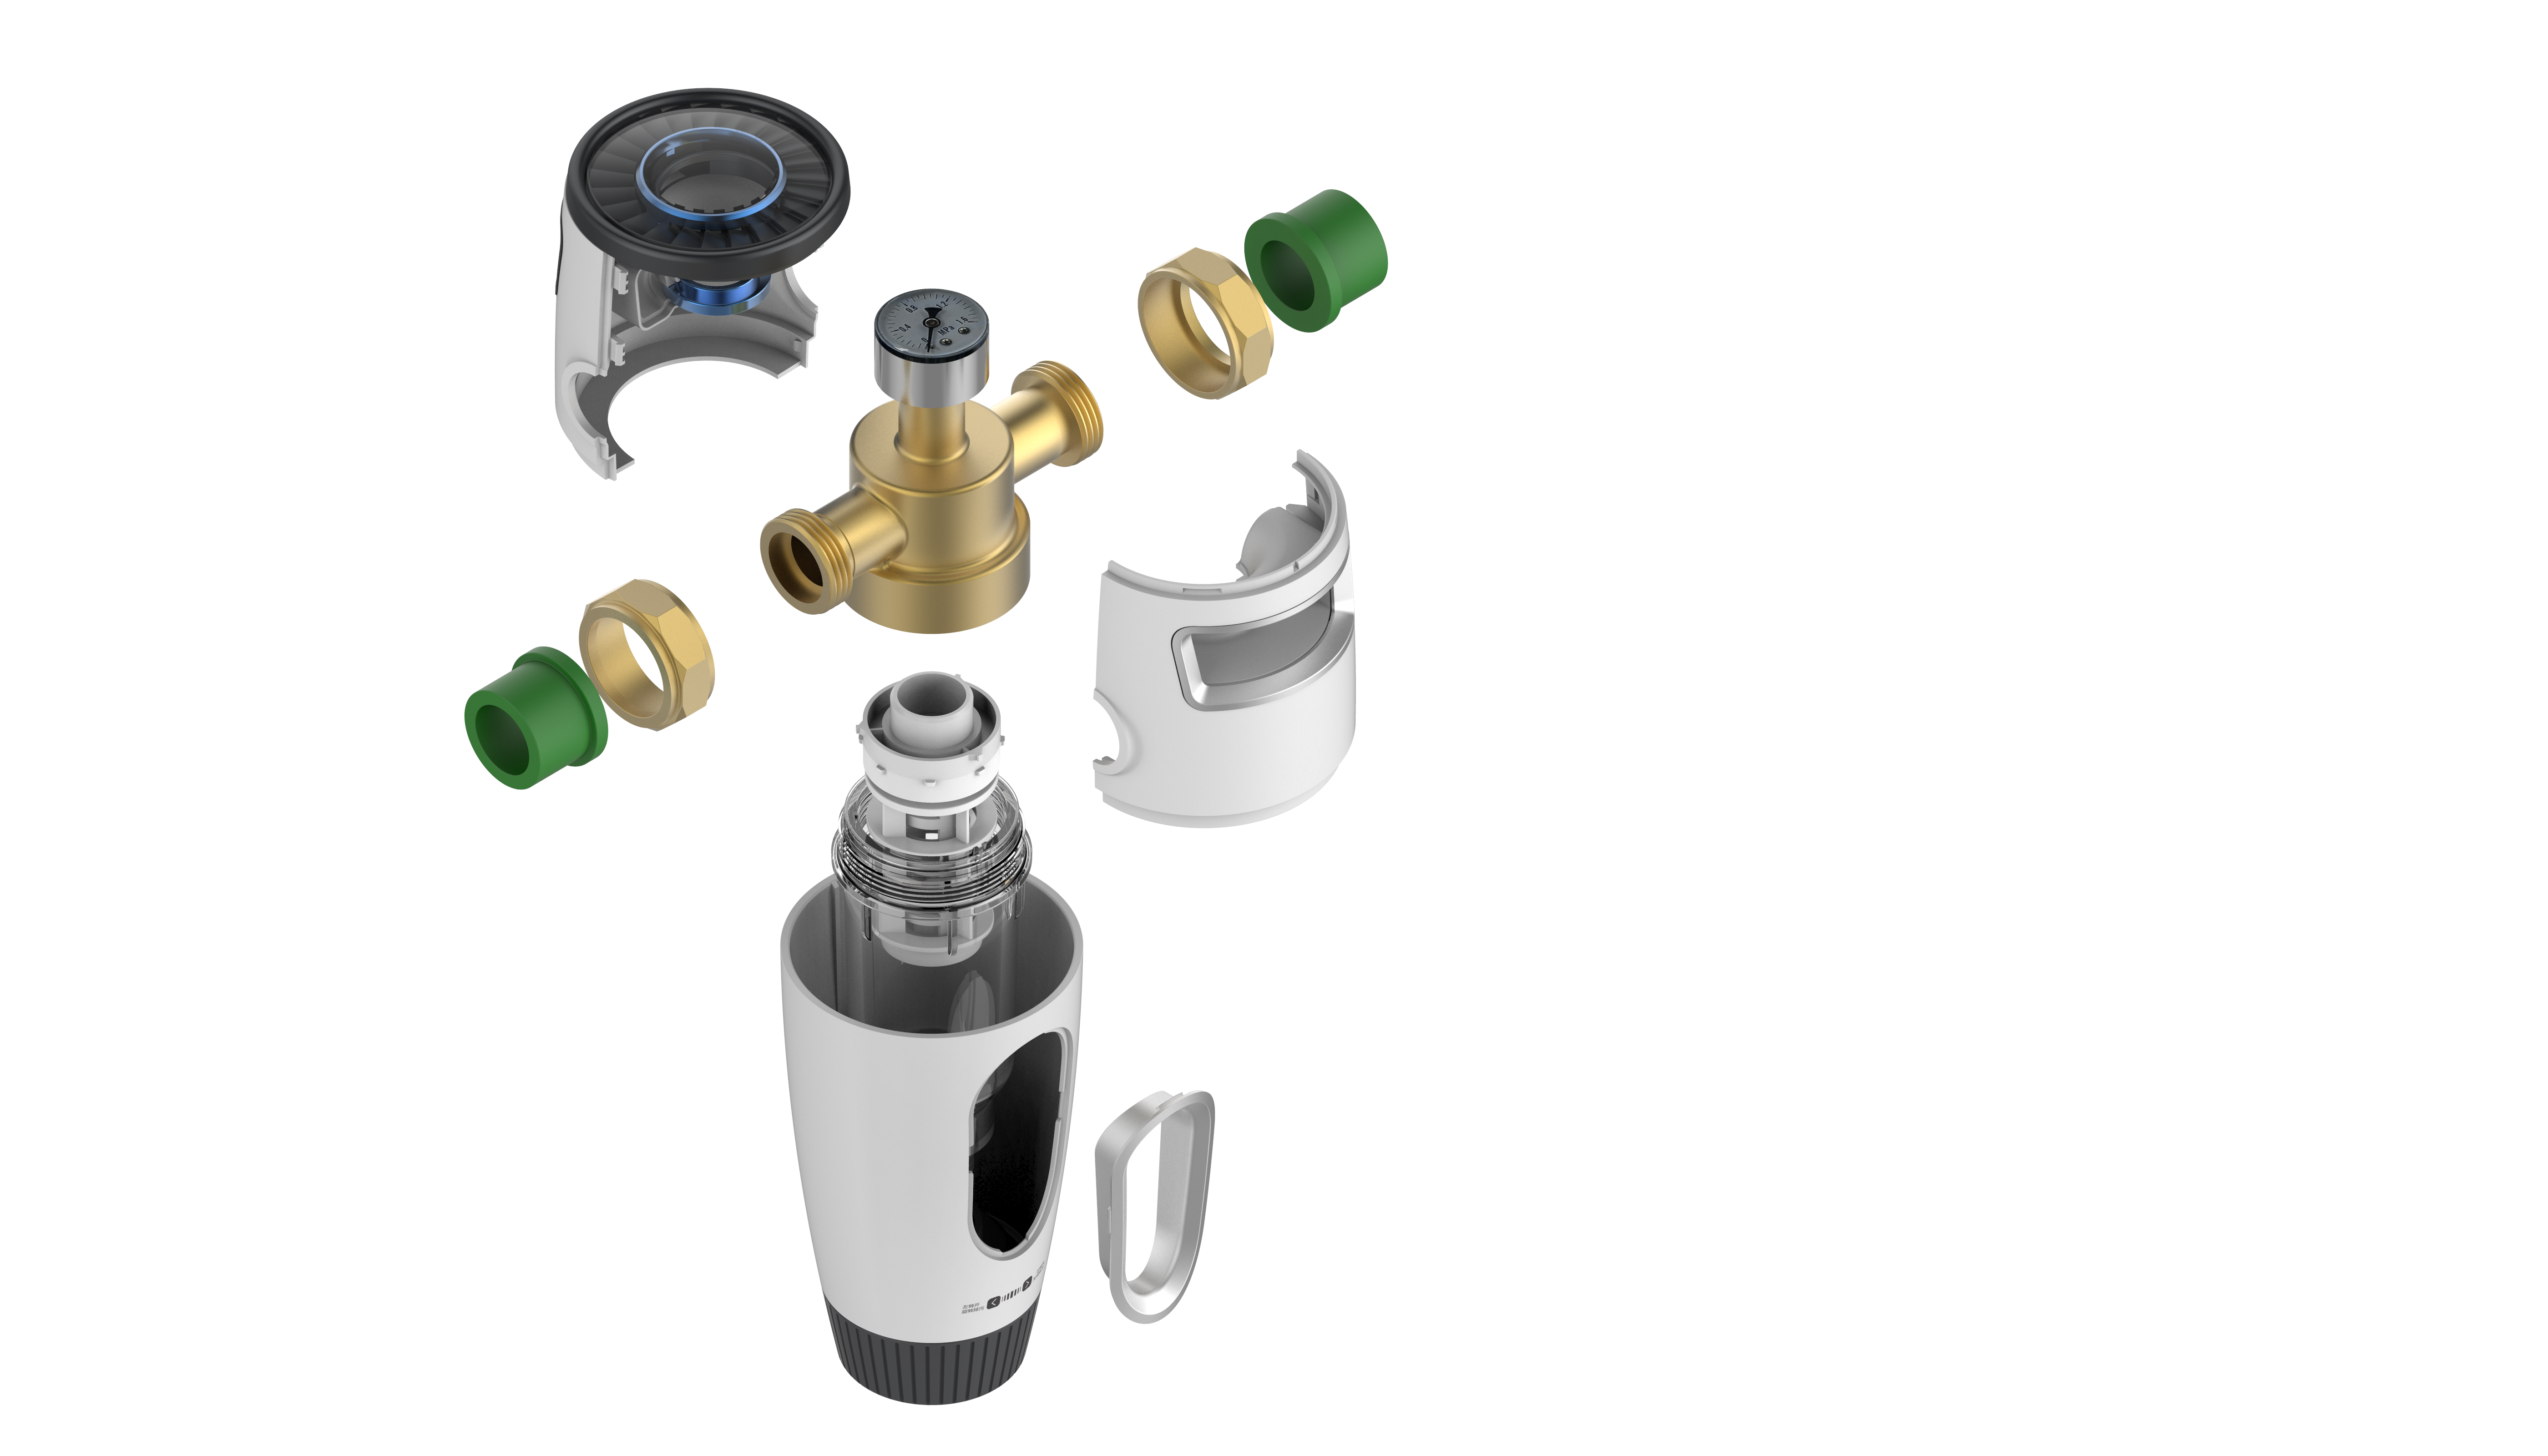 Water prefilter- New product release on April. 20th.2023